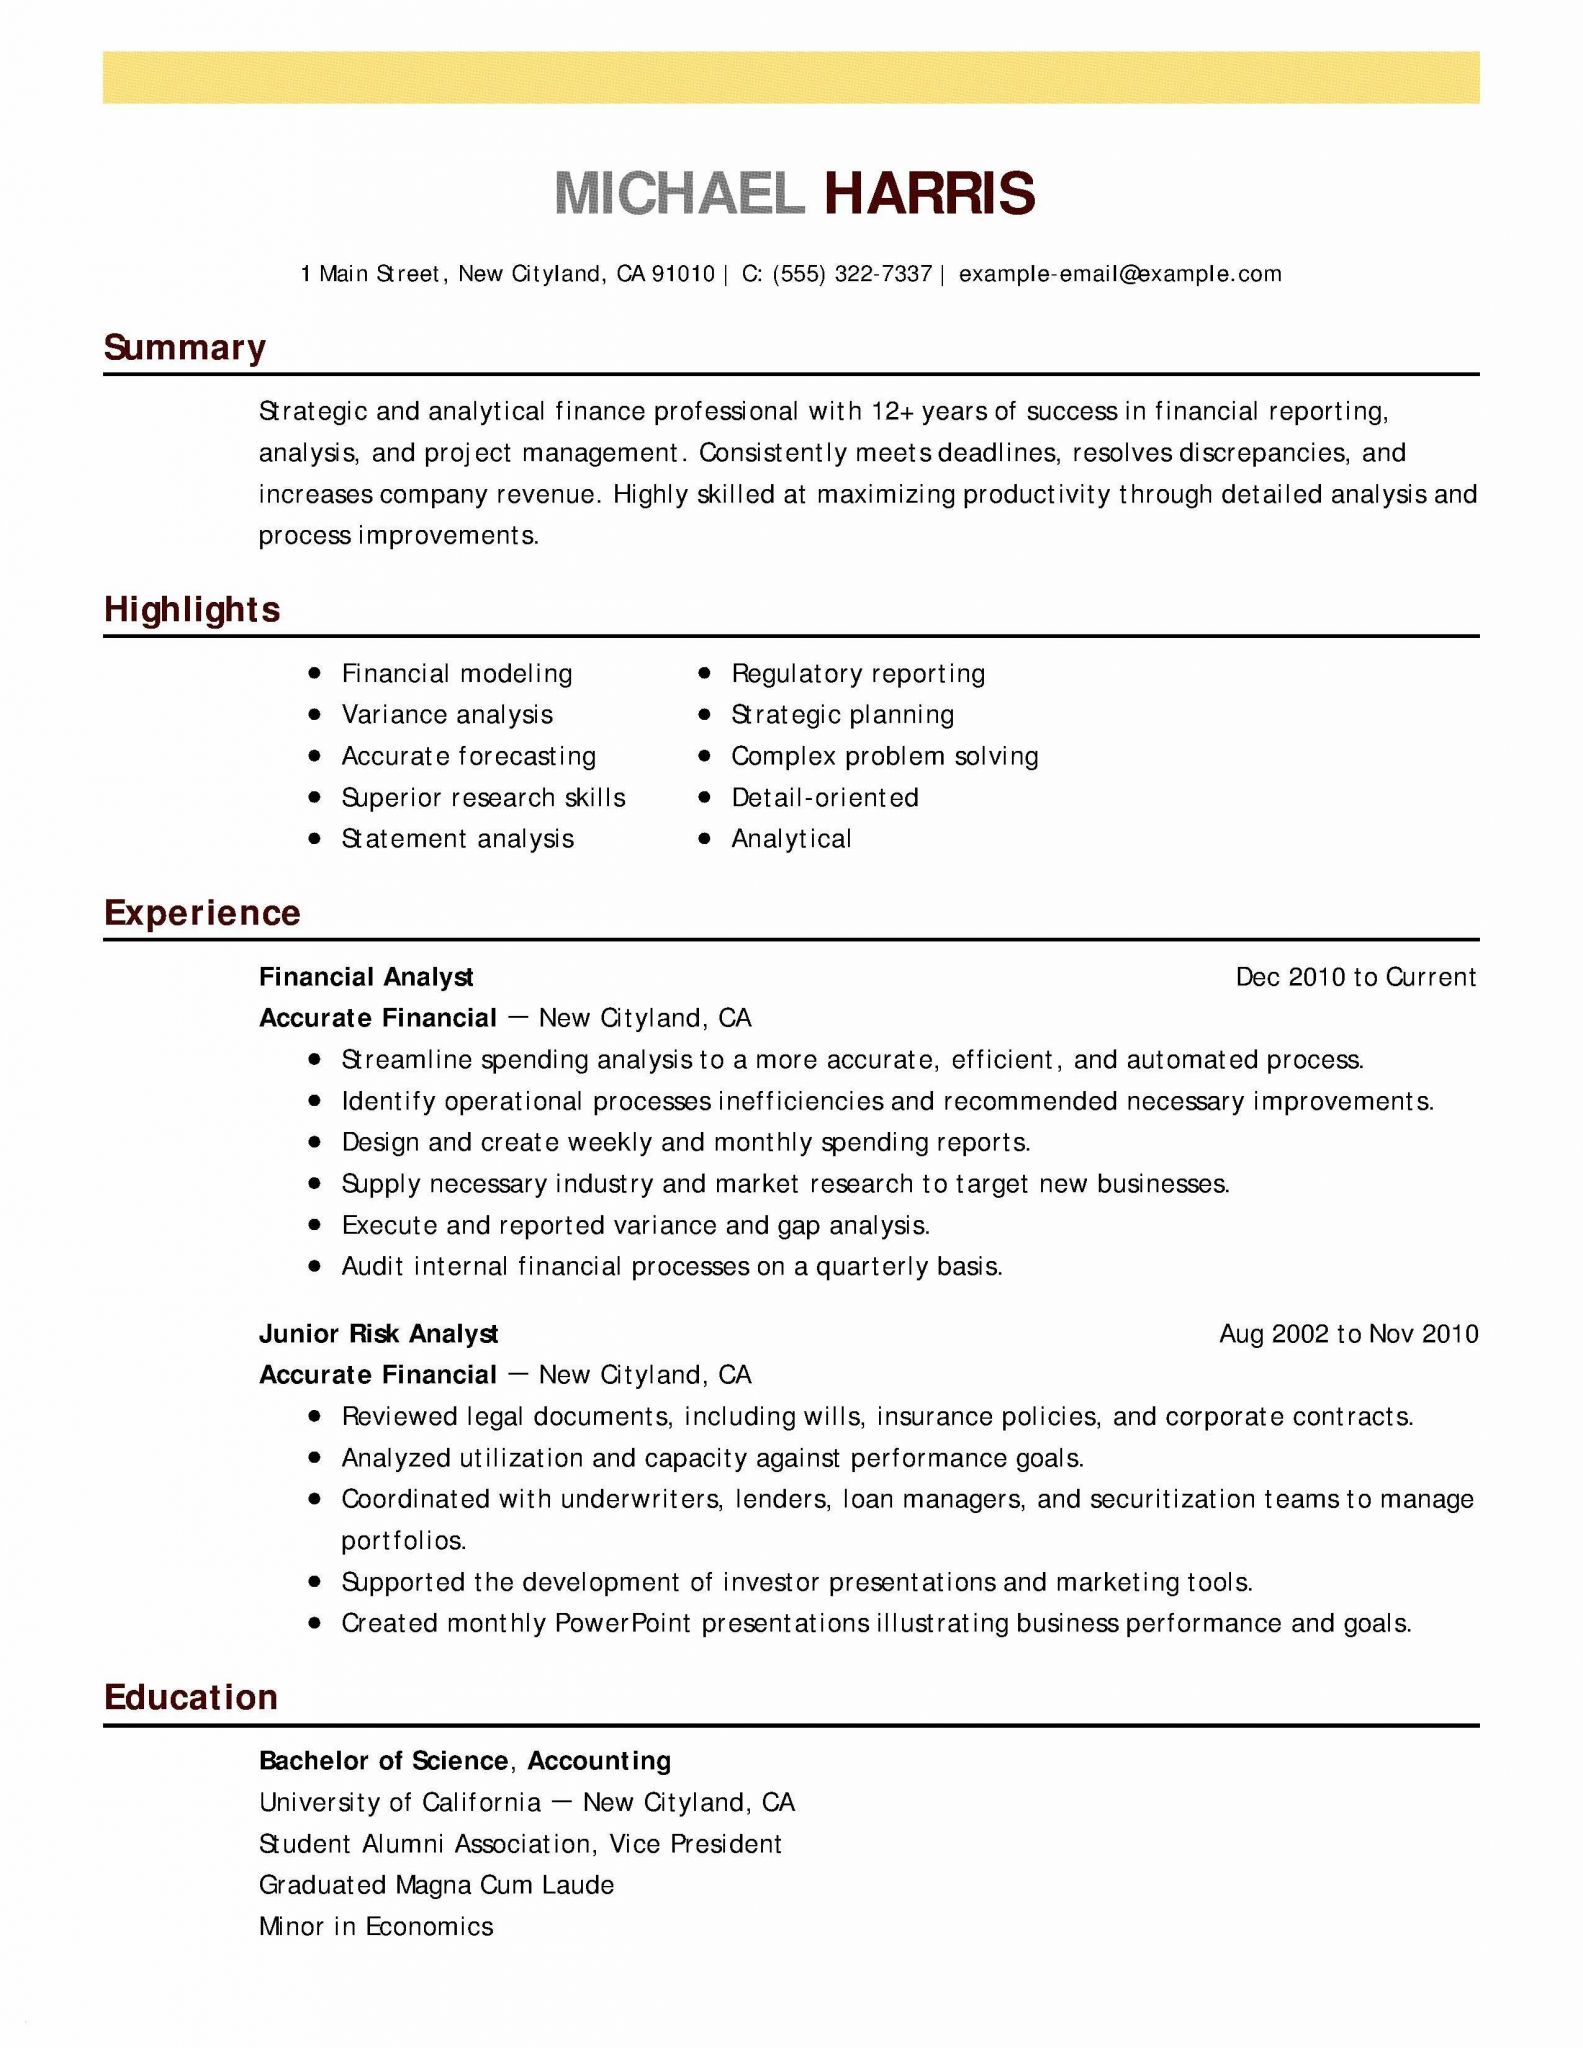 Fill In the Blank Resume Worksheet Along with Resume Template Basic Best Unique ats Resume Test Sfonthebridge